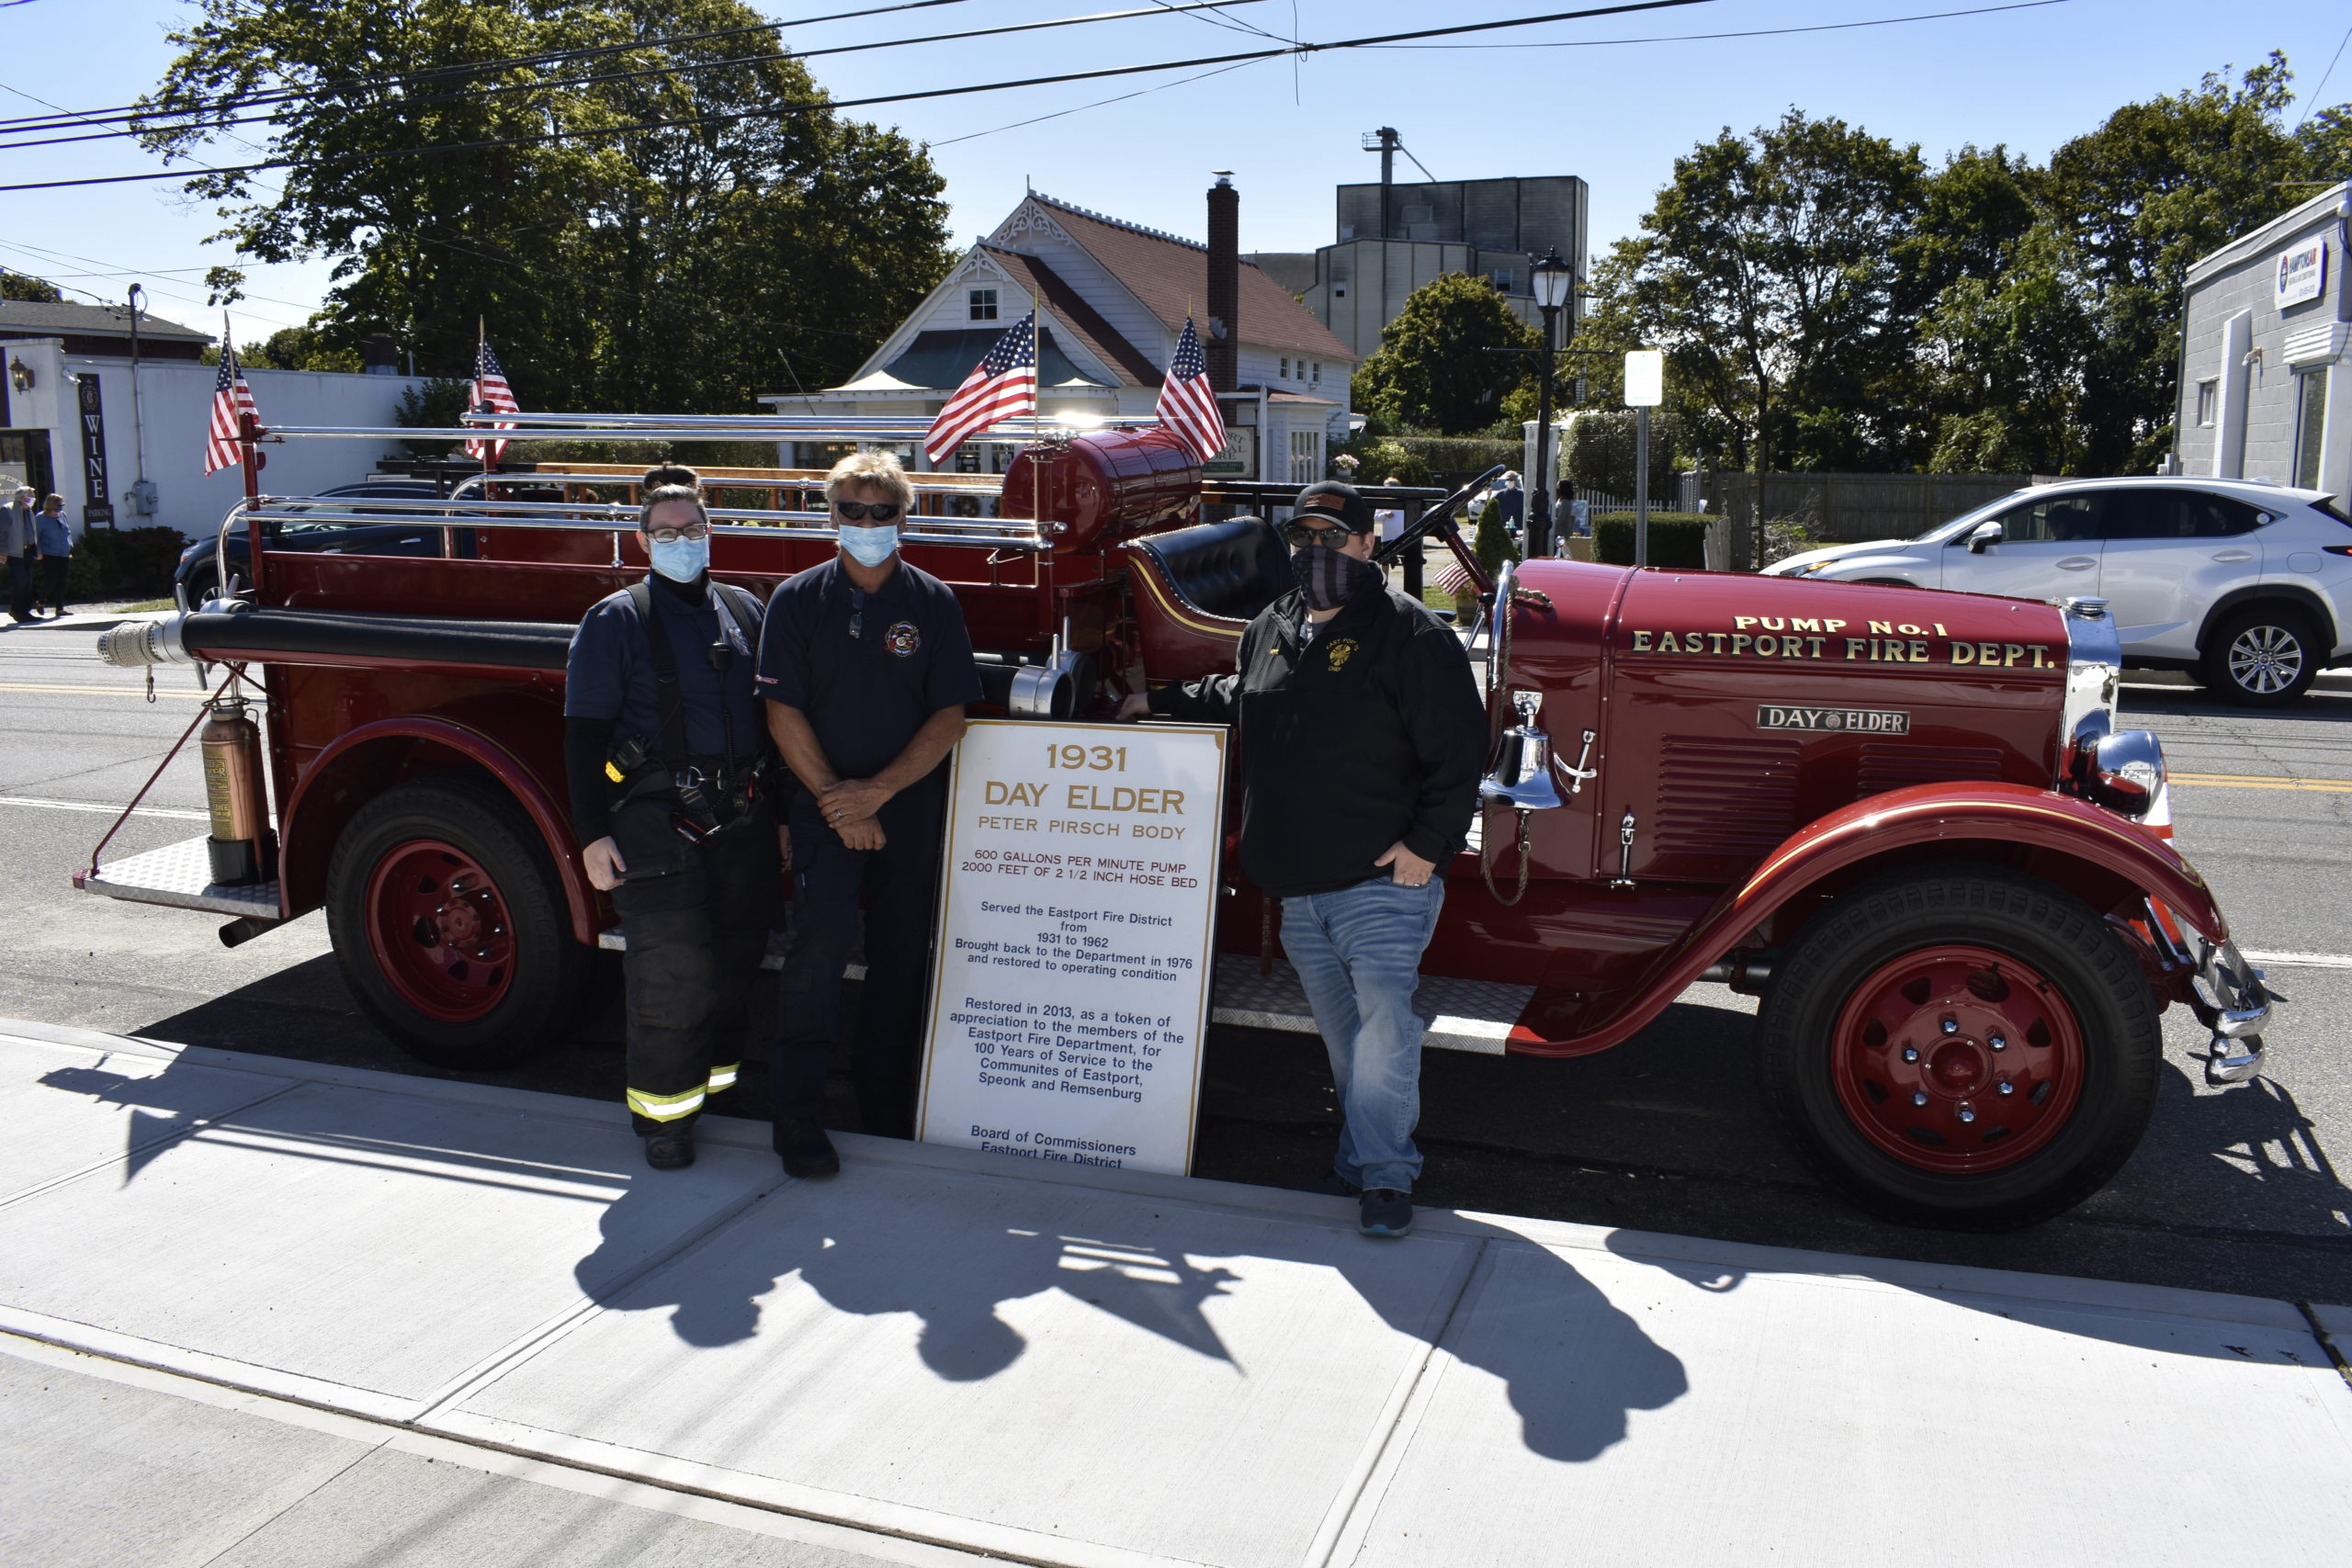 2nd Lt. Melissa Rankin, firefighter Roy Yeagar and Chief Mike Tortorice of the Eastport Fire Department showed off a vintage 1931 Day Elder firetruck.